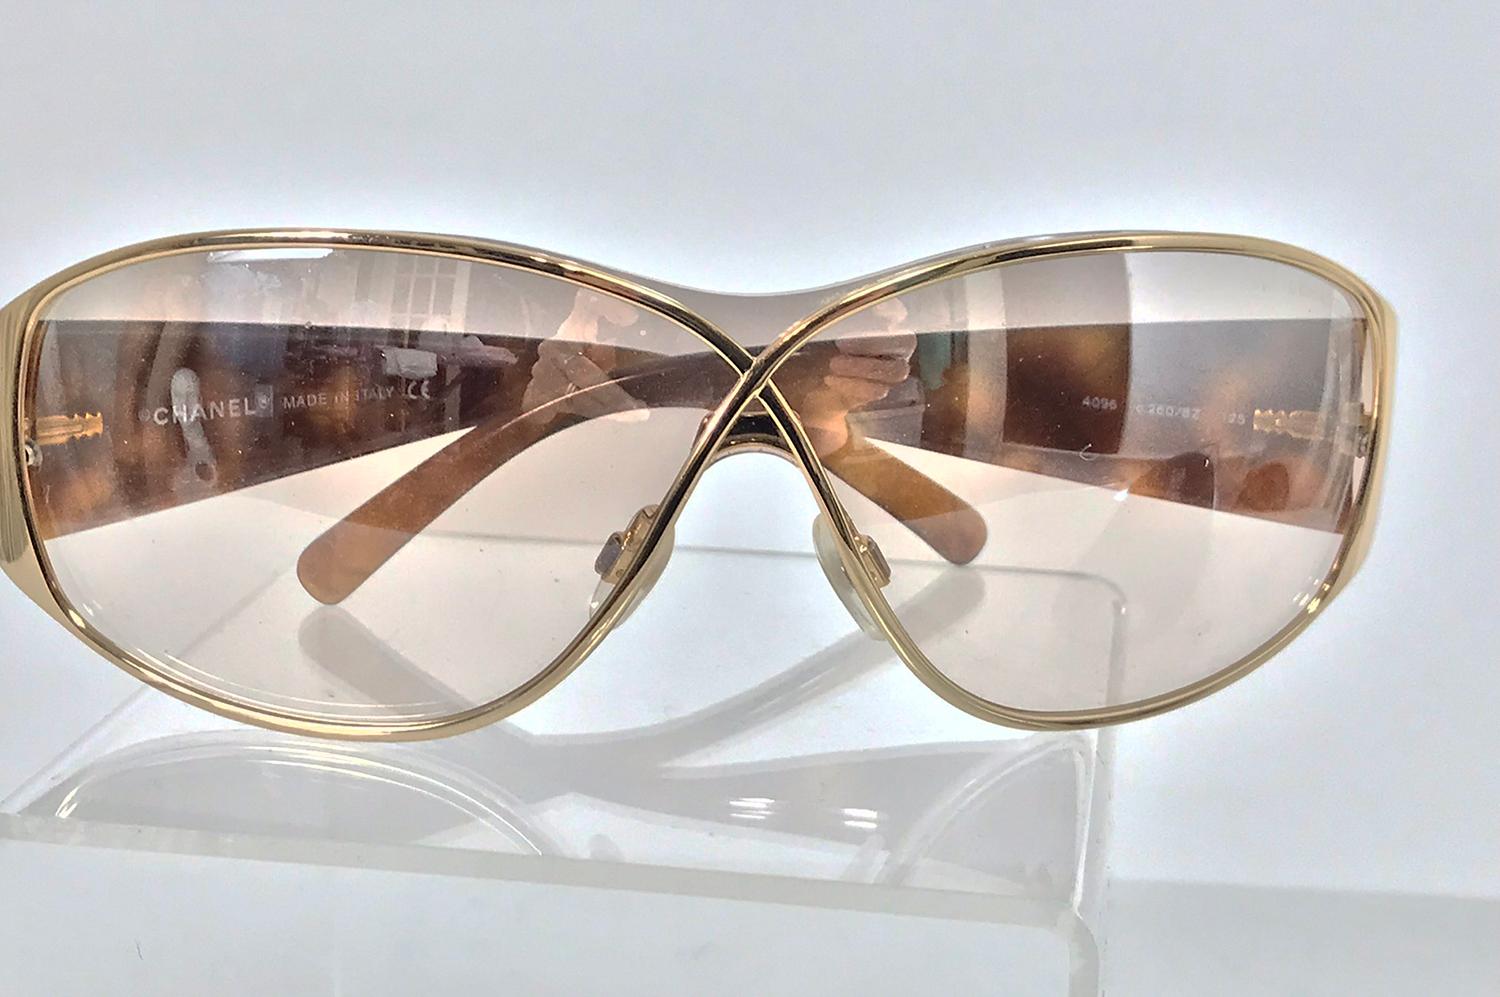 Chanel gold crossover frames with faux tortoise shell side ear pieces together with the rhinestone case. These chic sunglasses have a sleek look curving at the front to the sides, they have quilted light tortoise shell sides, the fronts are thin